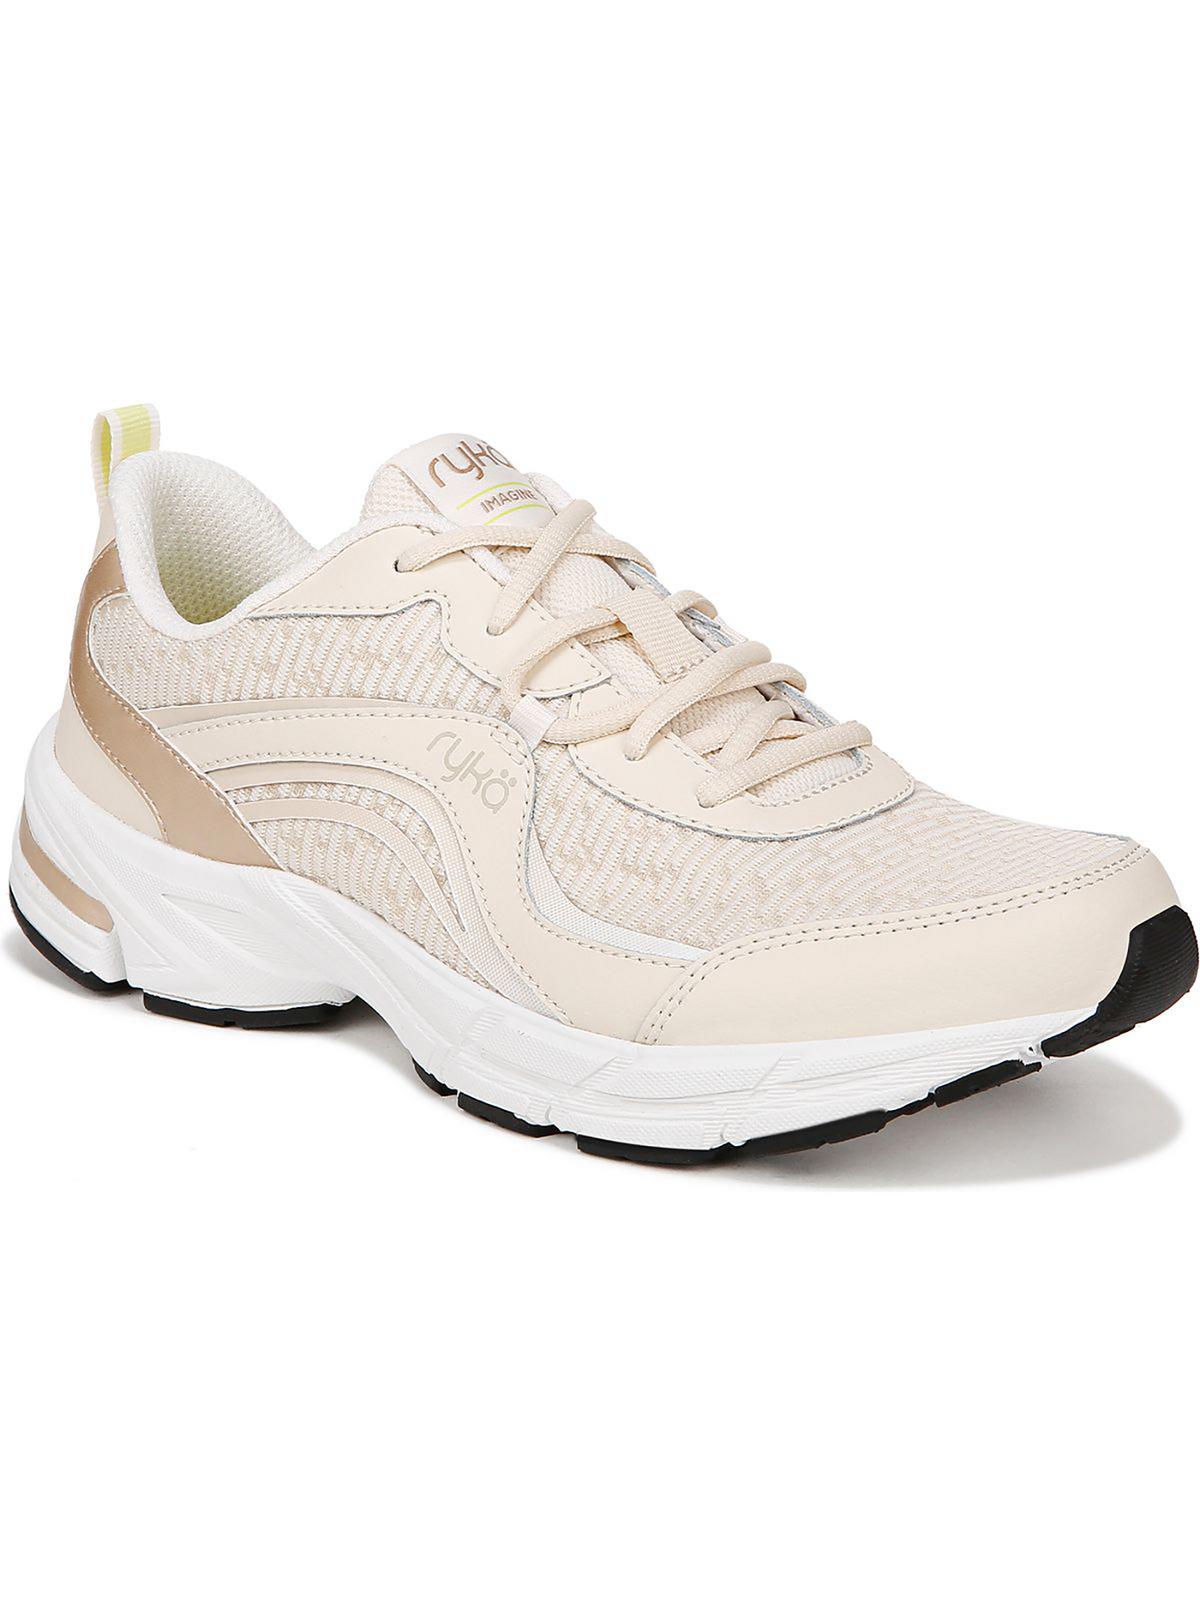 Ryka Imagine Womens Leather Fitness Athletic And Training Shoes In Gold